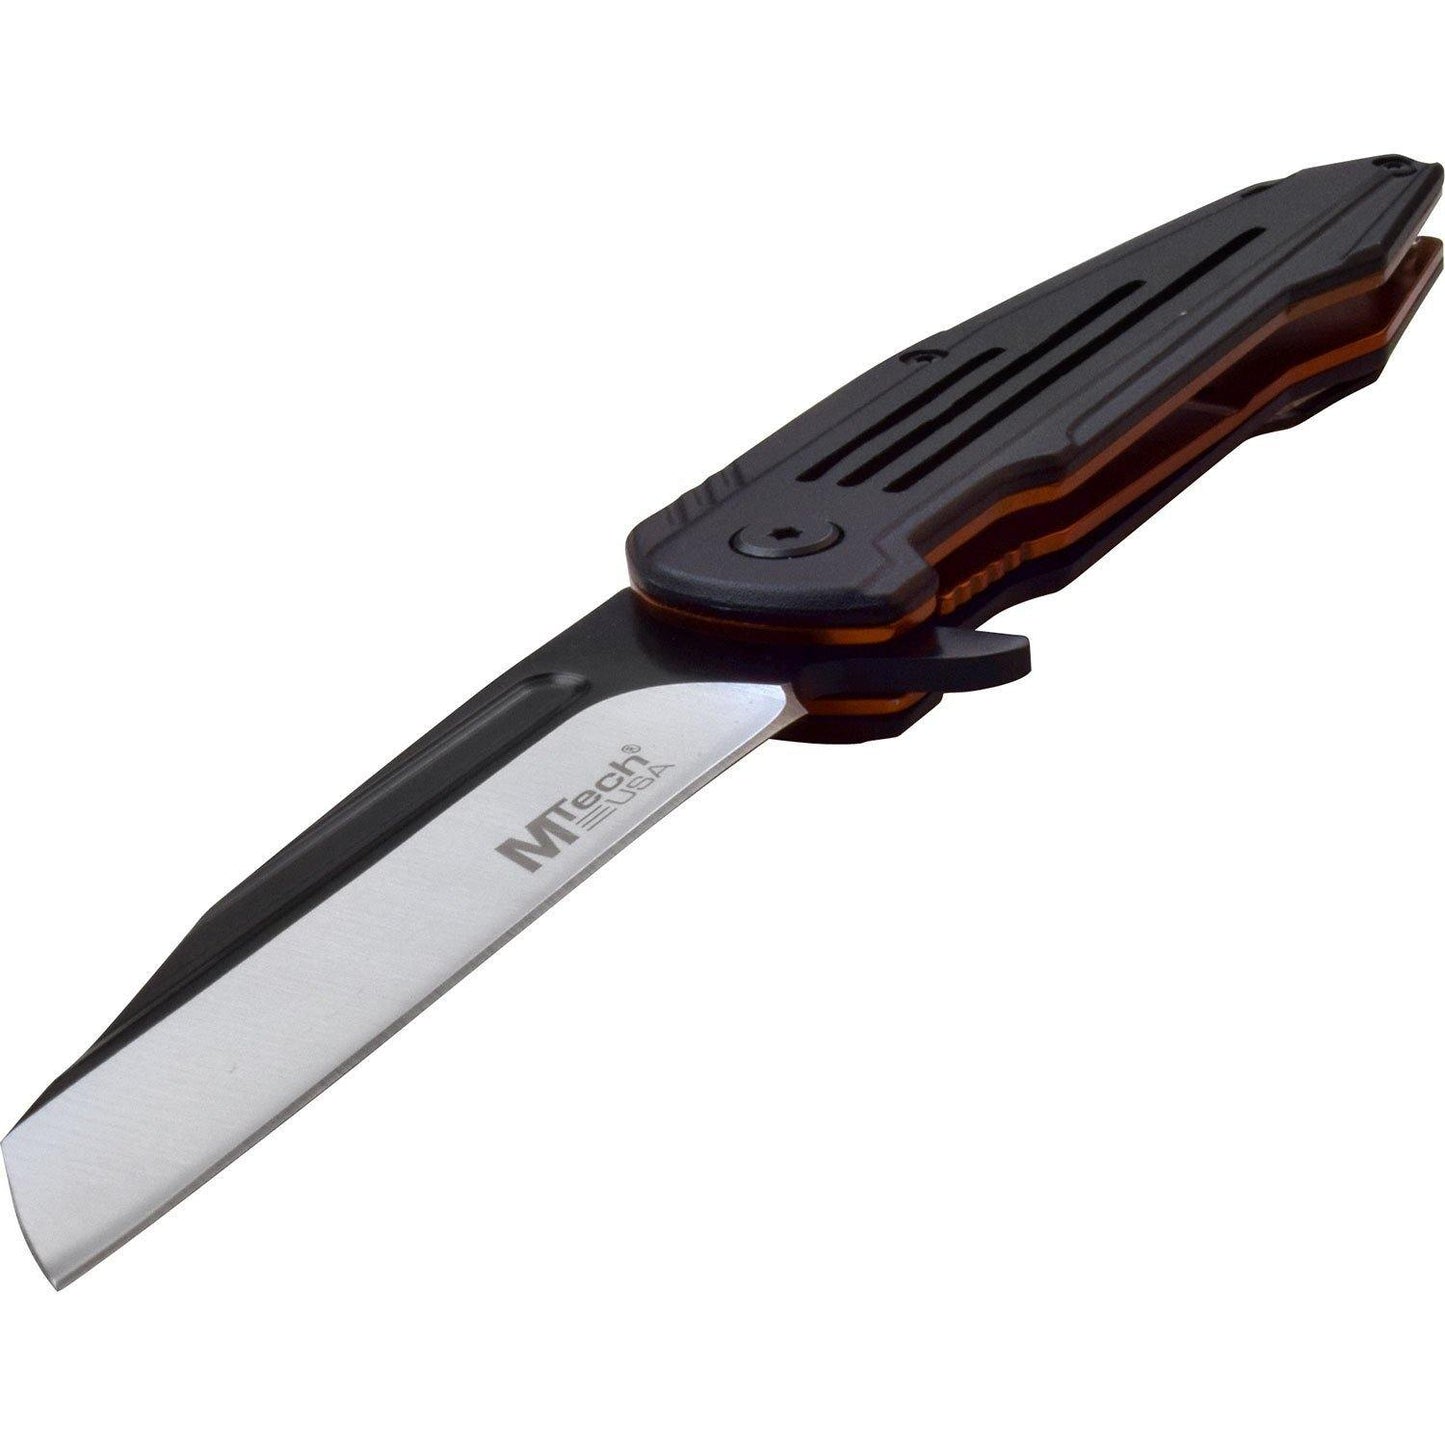 Mtech Fine Edge Blade Manual Folding Knife - 8 Inches Overall #mt-1060Or - Xhunter New Zealand